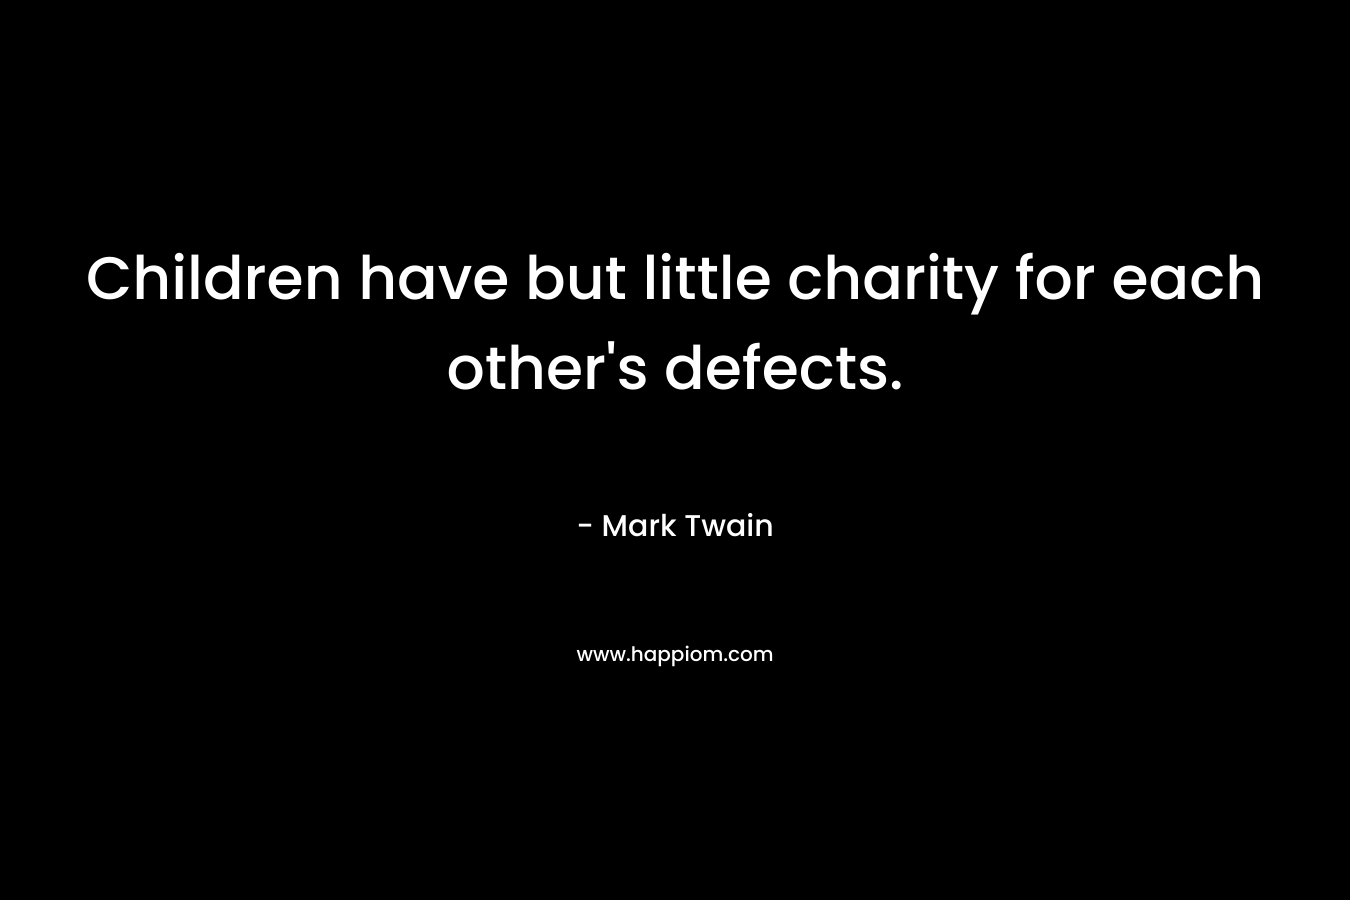 Children have but little charity for each other’s defects. – Mark Twain